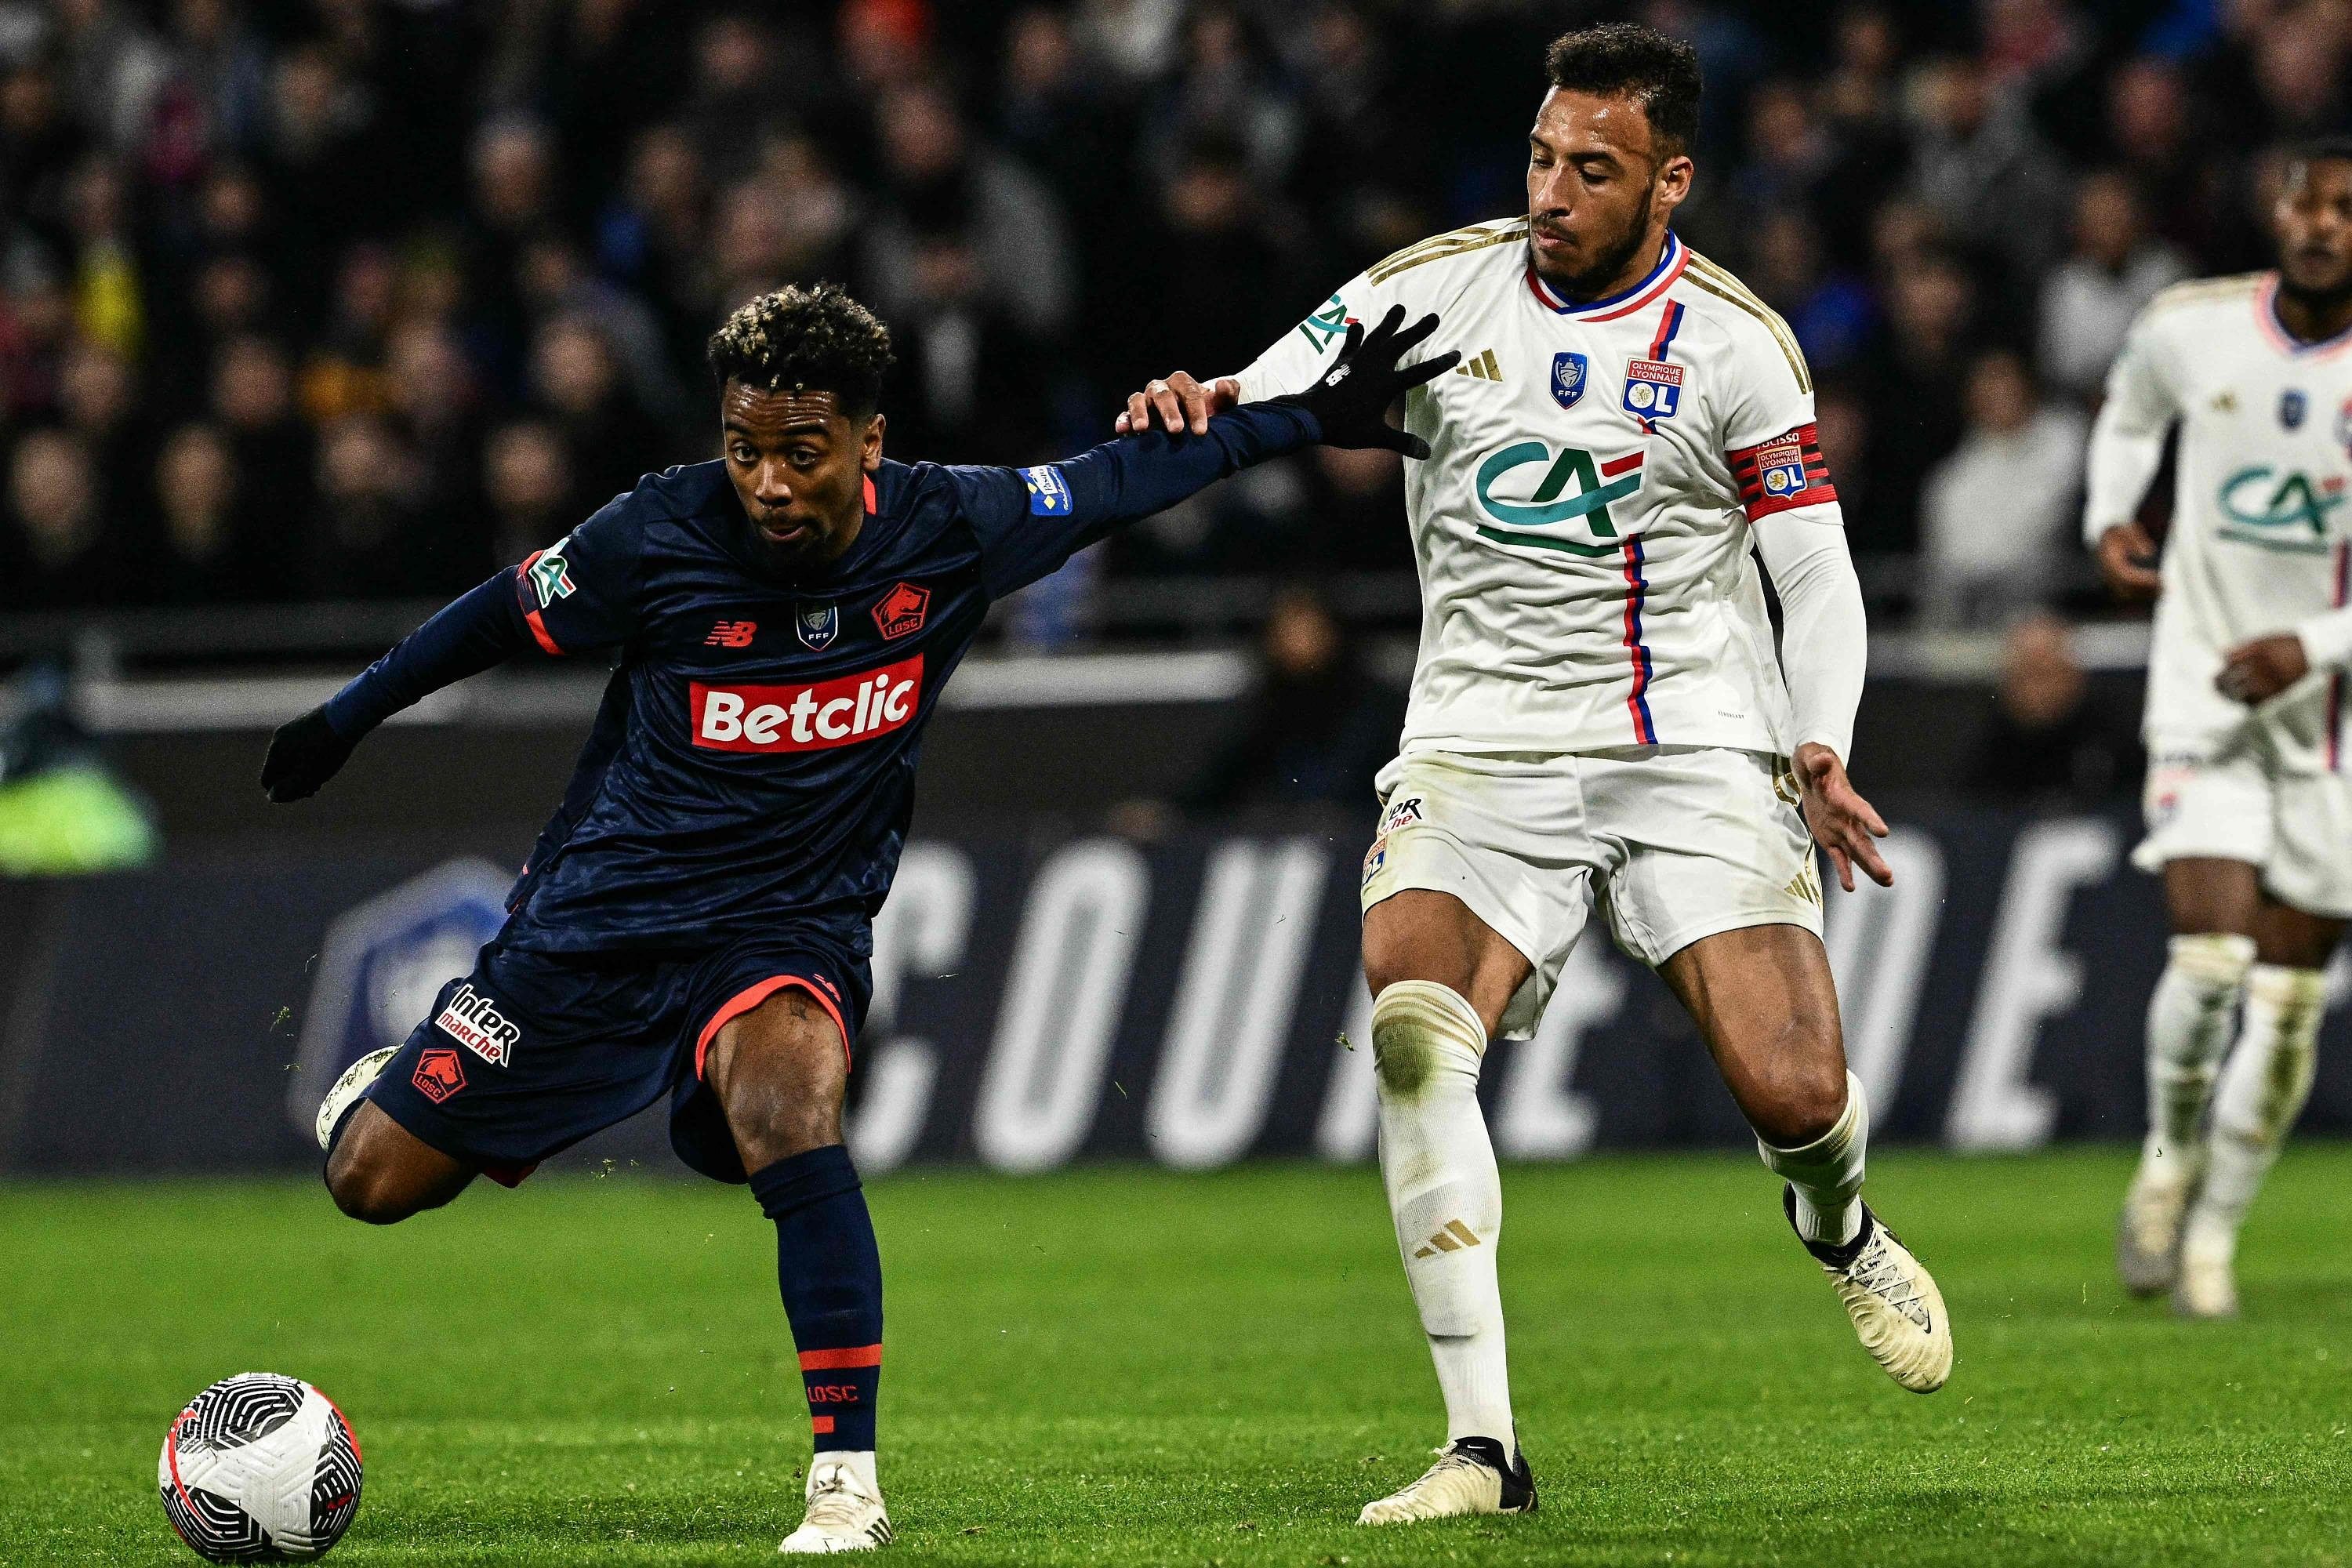 Ligue 1: “It doesn’t seem too serious,” reassures the OL coach after Tolisso’s thigh alert